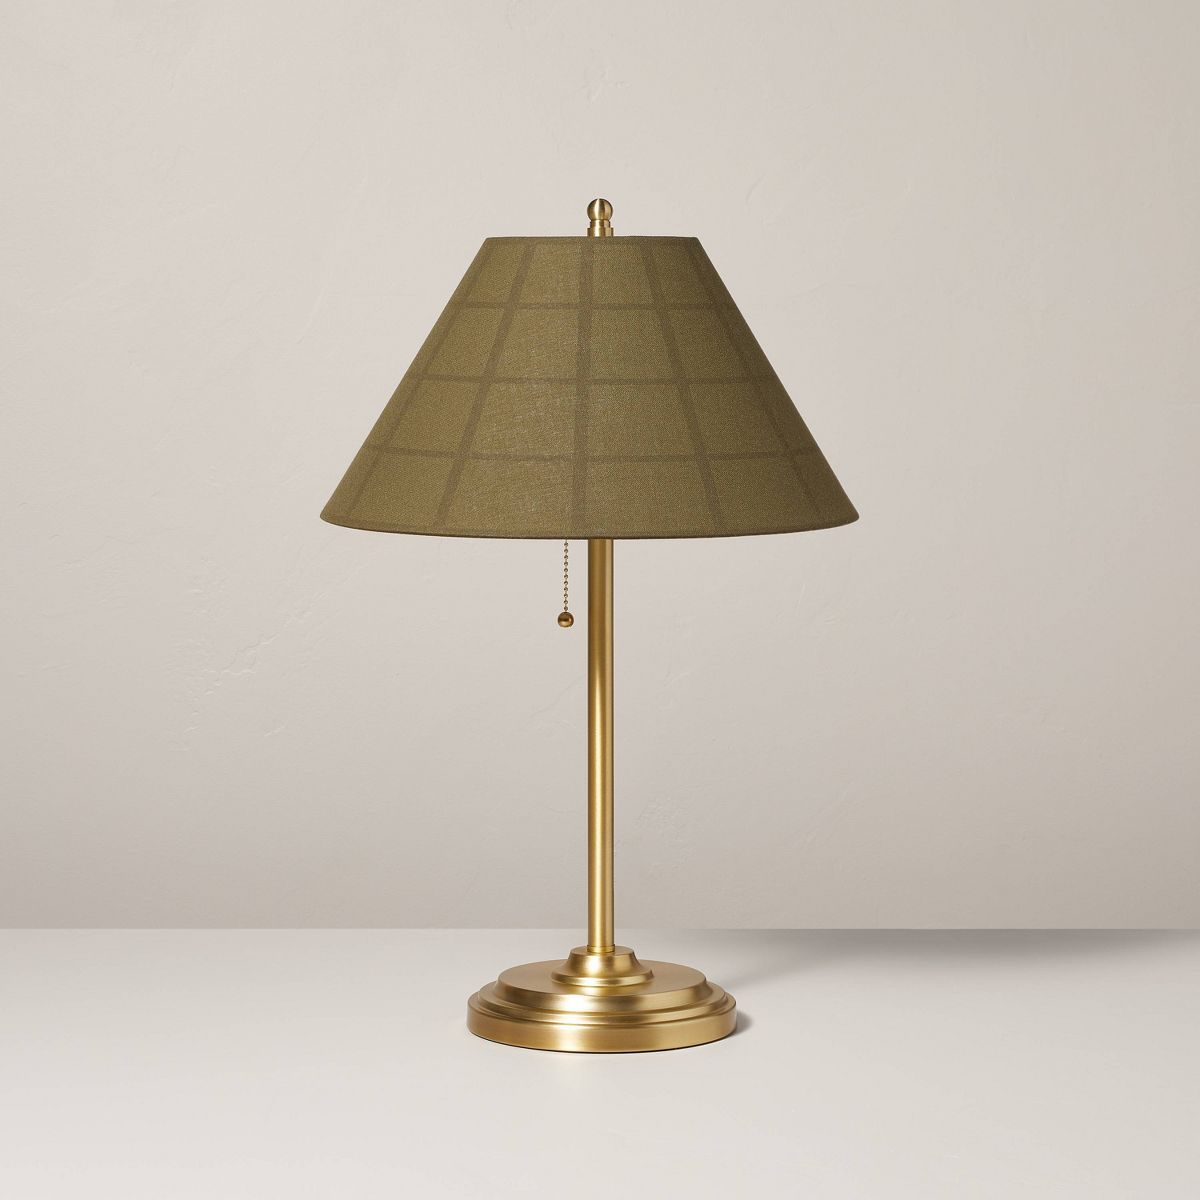 23" Plaid Shade Metal Table Lamp Brass/Green - Hearth & Hand™ with Magnolia | Target